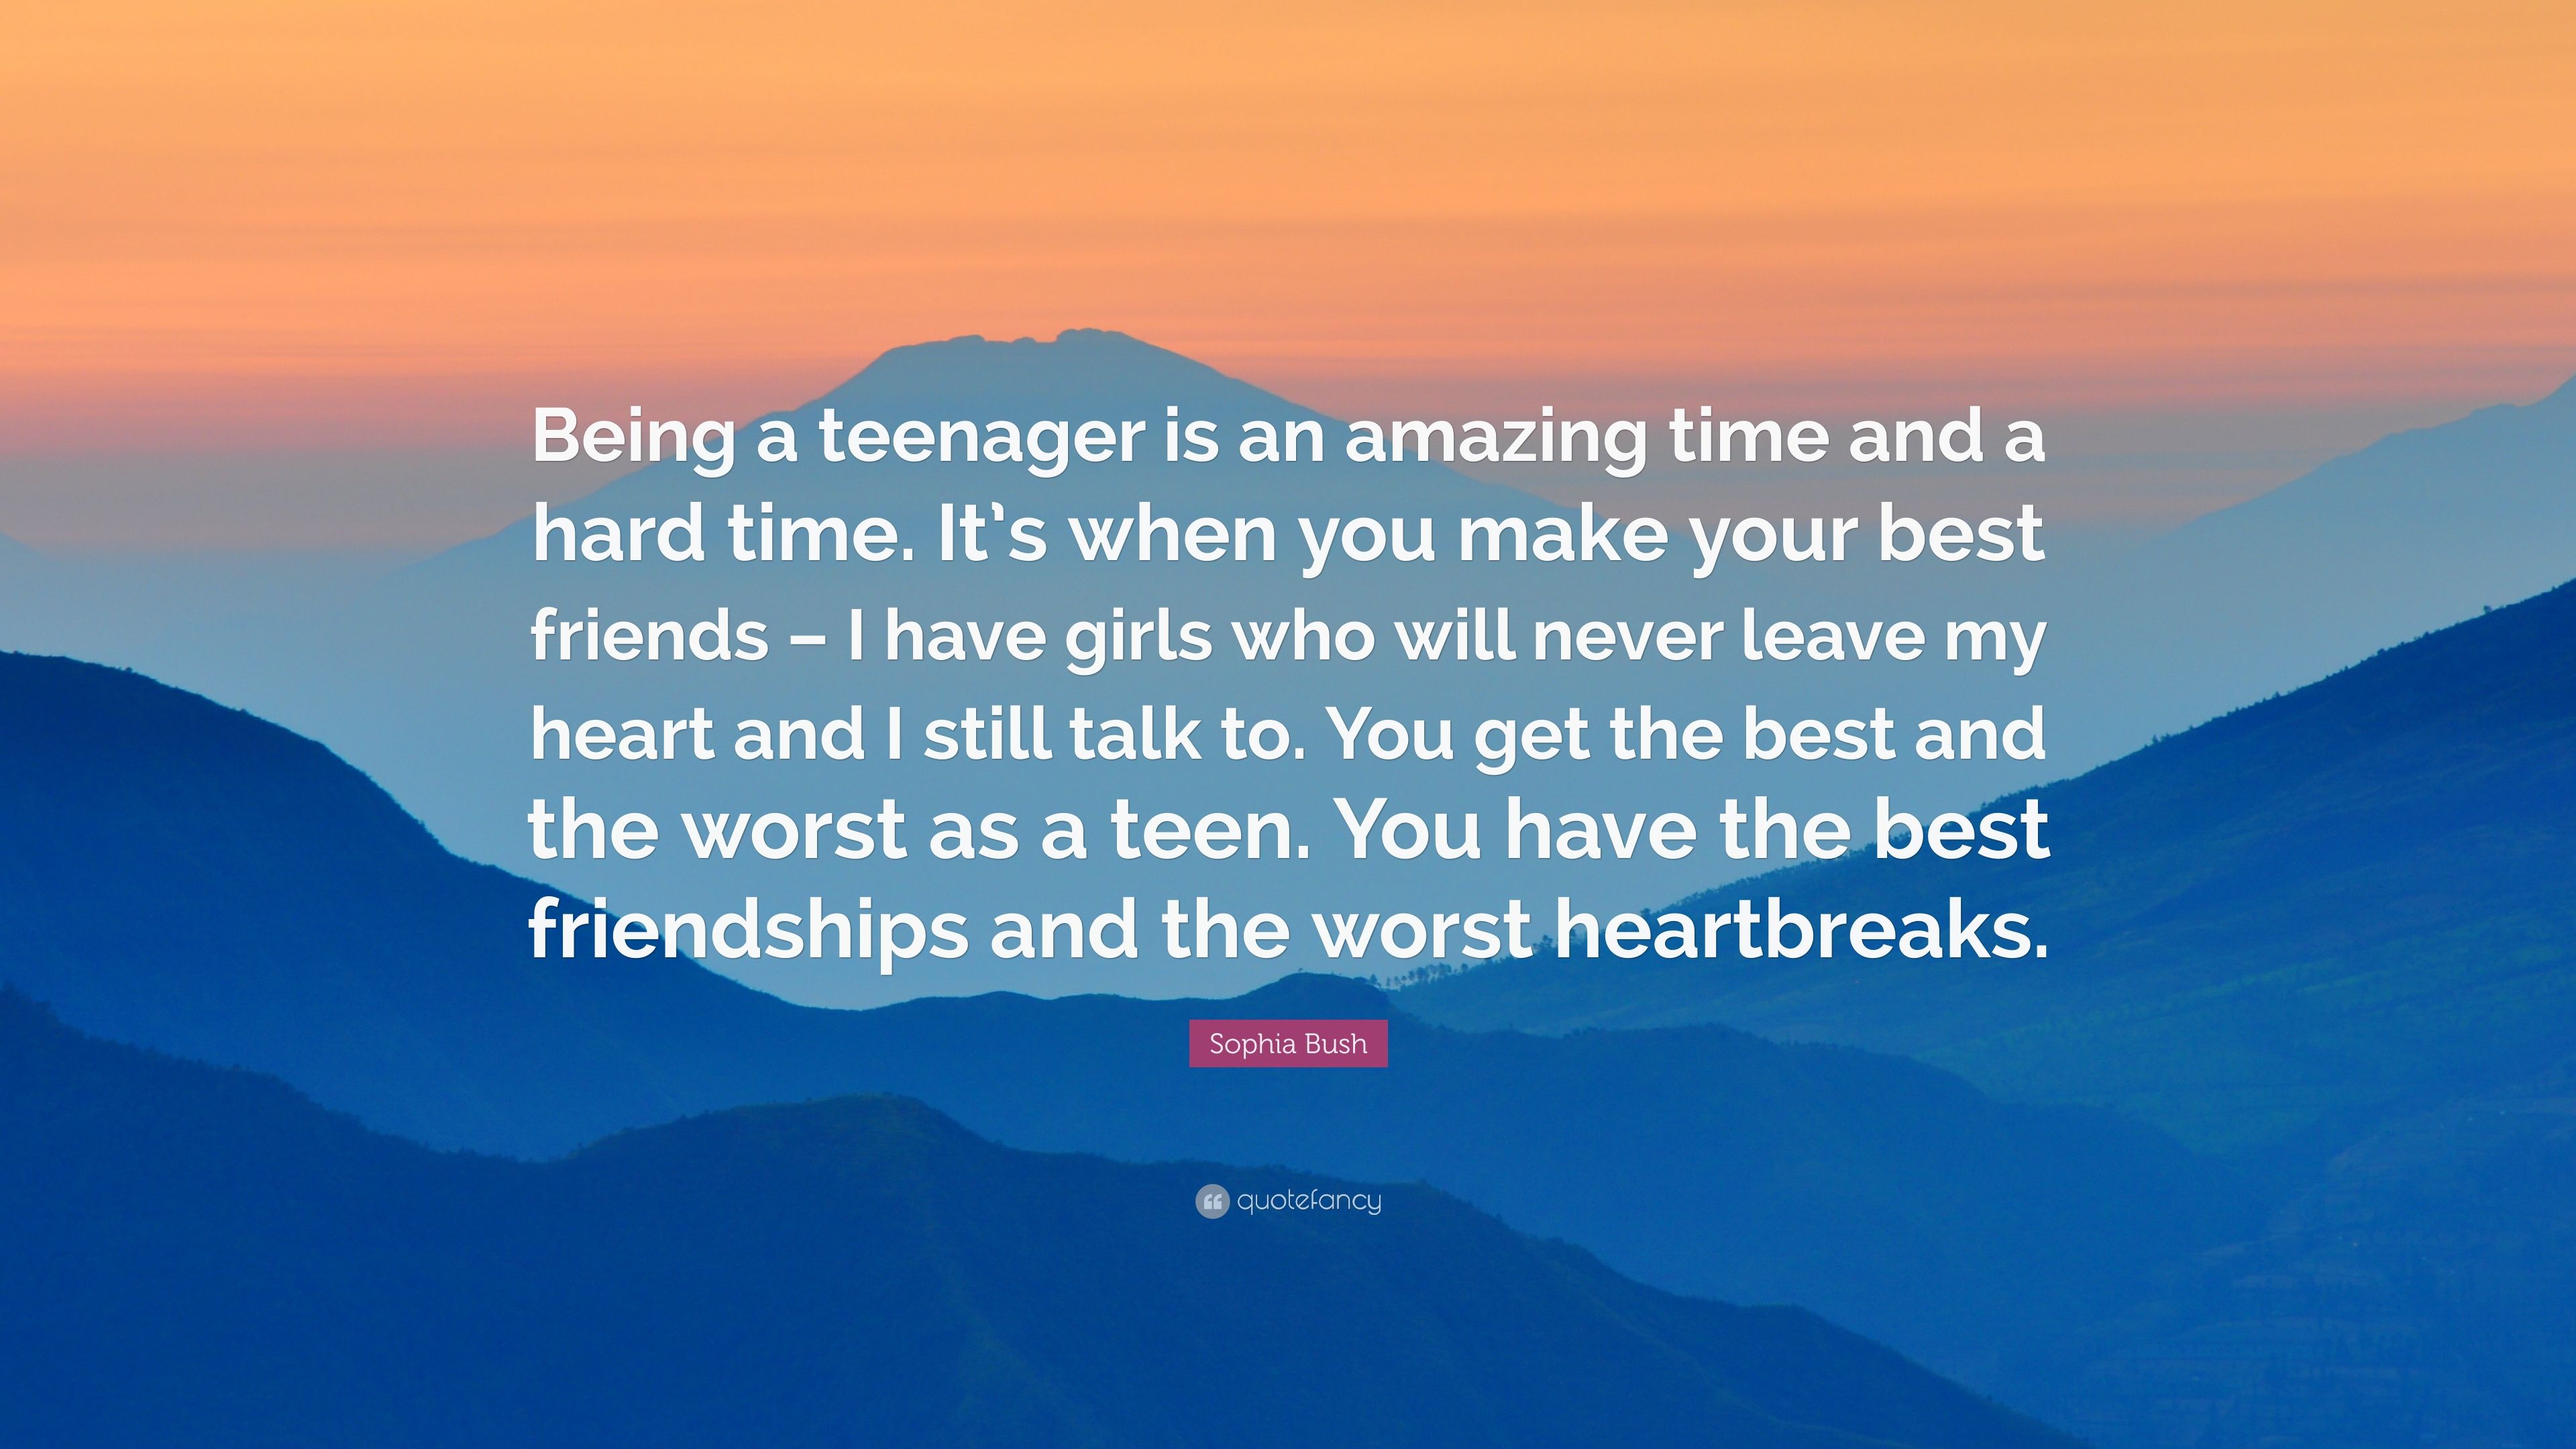 Sophia Bush Quote: “Being a teenager is an amazing time and a hard time. It's when you make your best friends